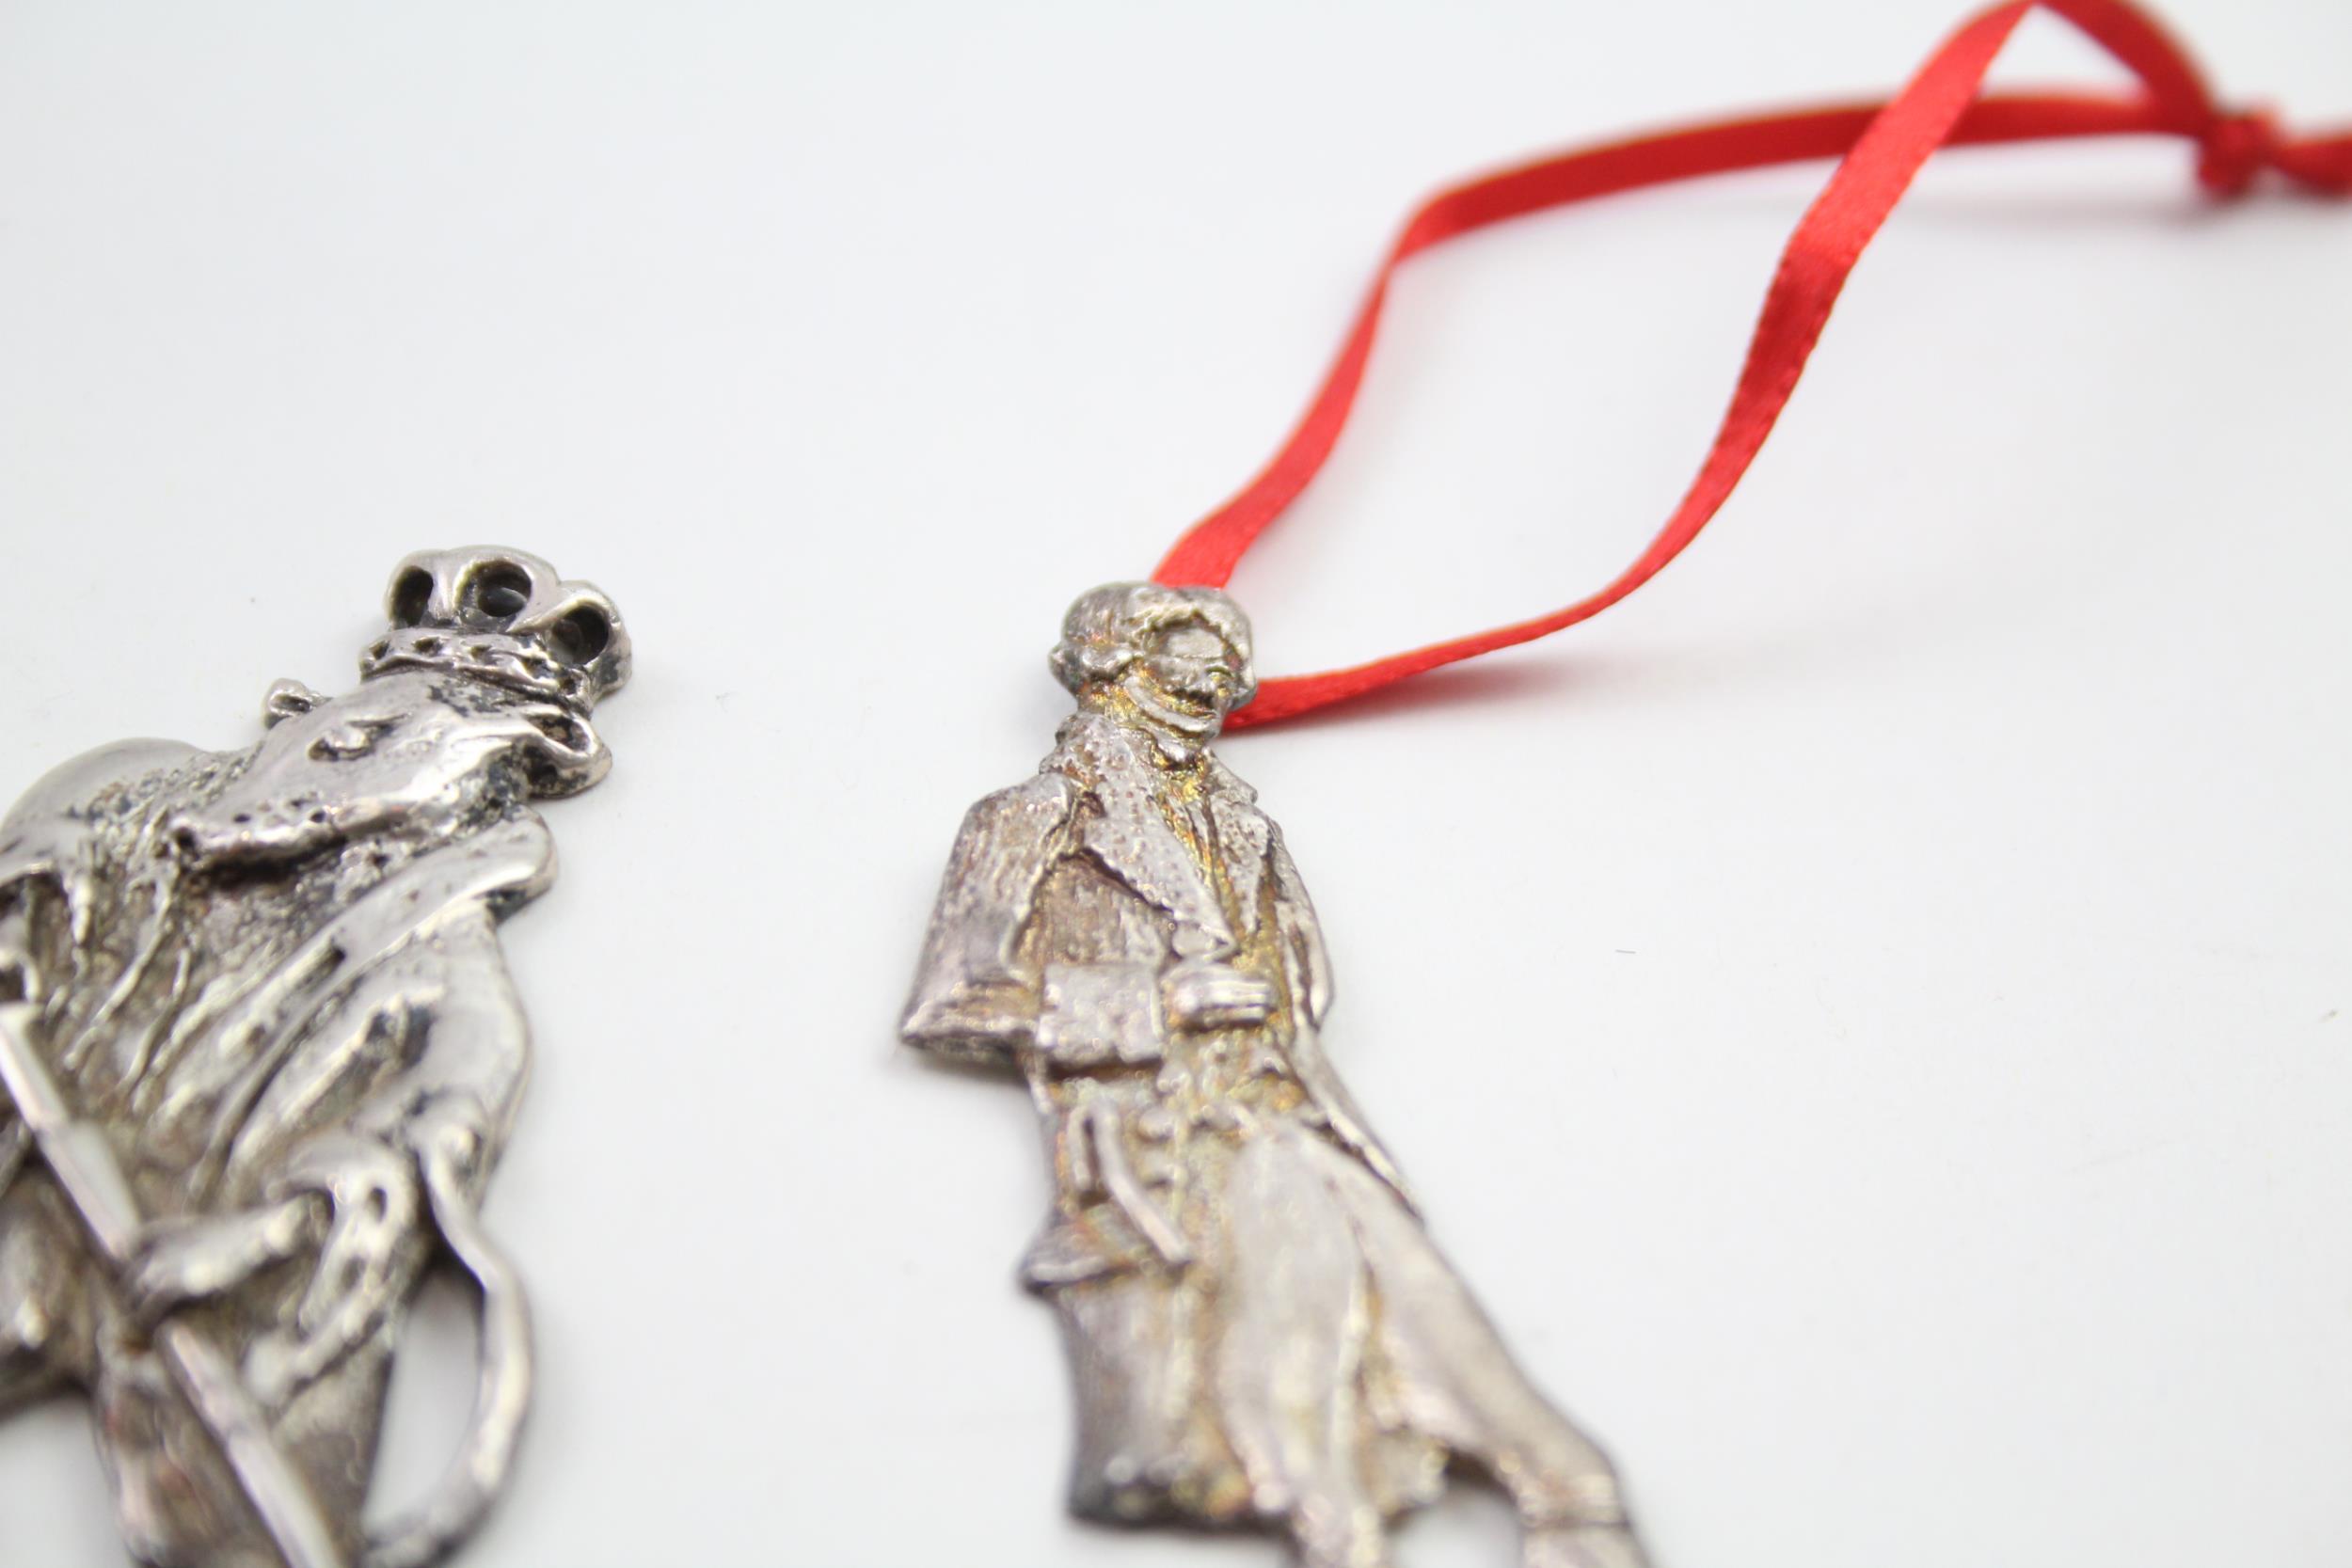 3 x Vintage .925 Sterling Silver Novelty Portrait Ornaments Inc Soldier 35g - Approx Height - 6. - Image 7 of 7